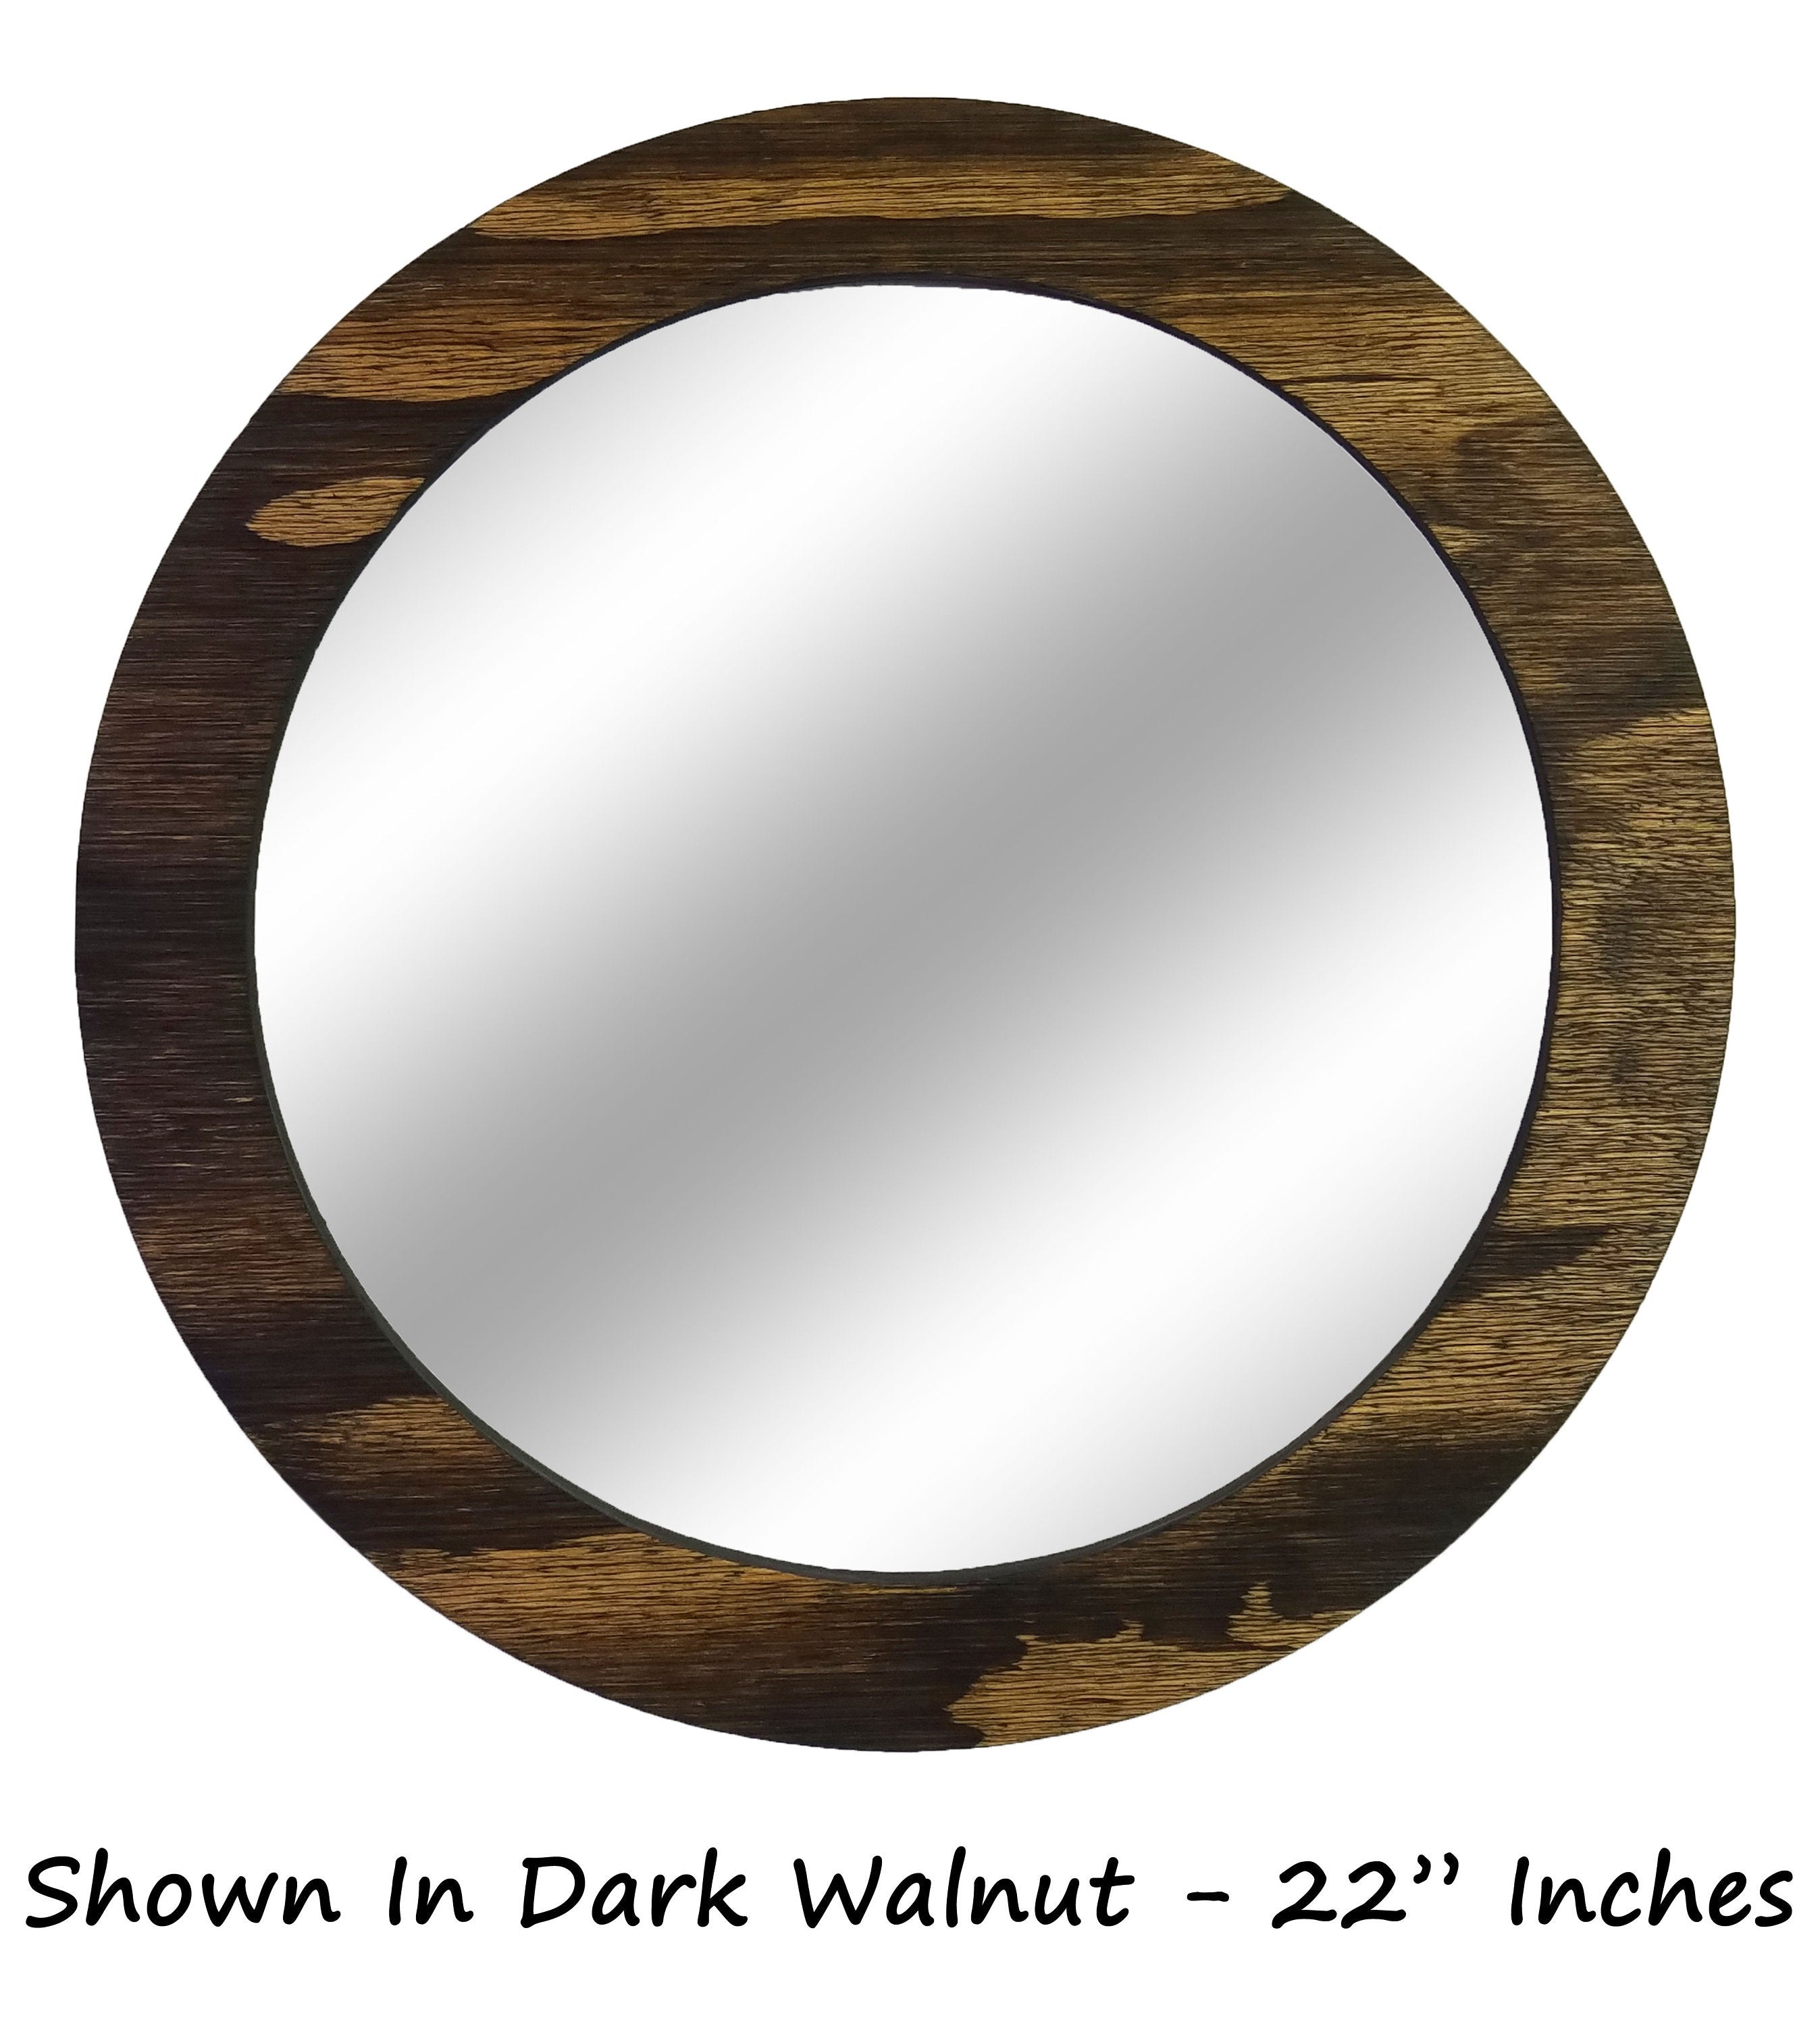 Round Mirrors 24inch Wall Mirrors Decorative Wood Frame Morden